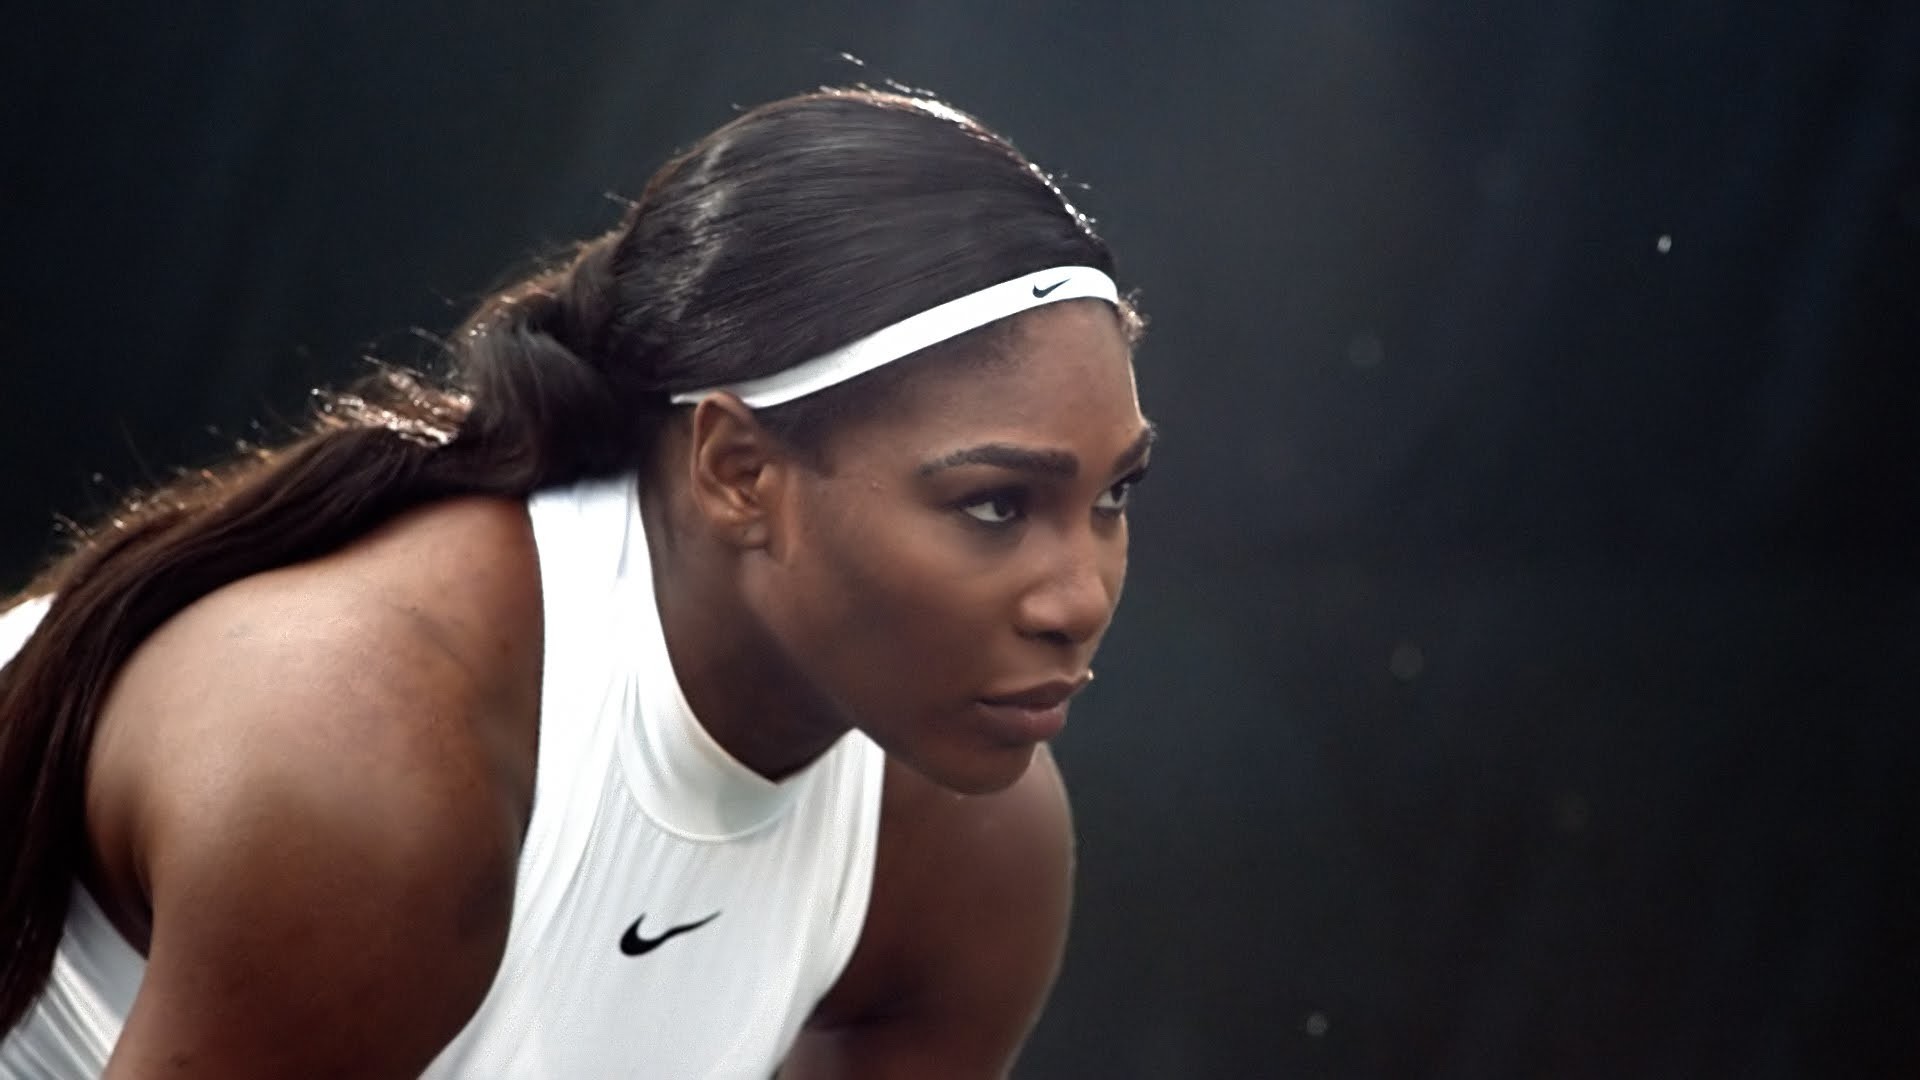 1920x1080 Serena Williams can “absolutely” surpass Margaret Court's all-time record  of 24 grand slam singles titles if the American returns to tennis after  giving ...